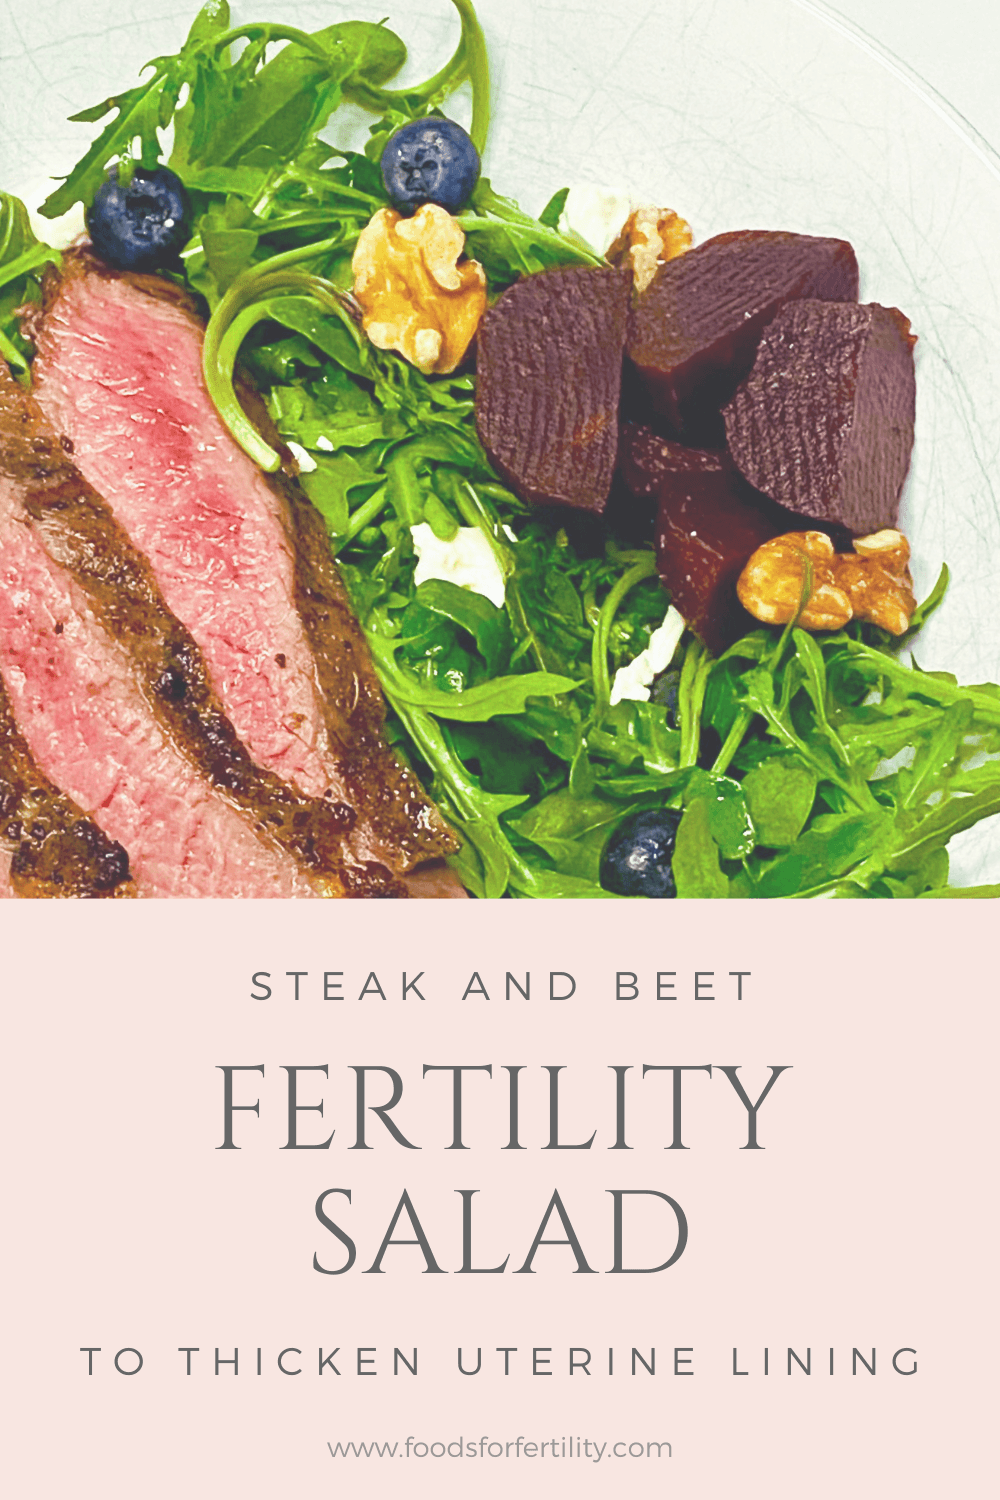 Foods to Thicken Uterine Lining for IVF - Superfood Steak Salad Fertility Salad - Fertility Recipe